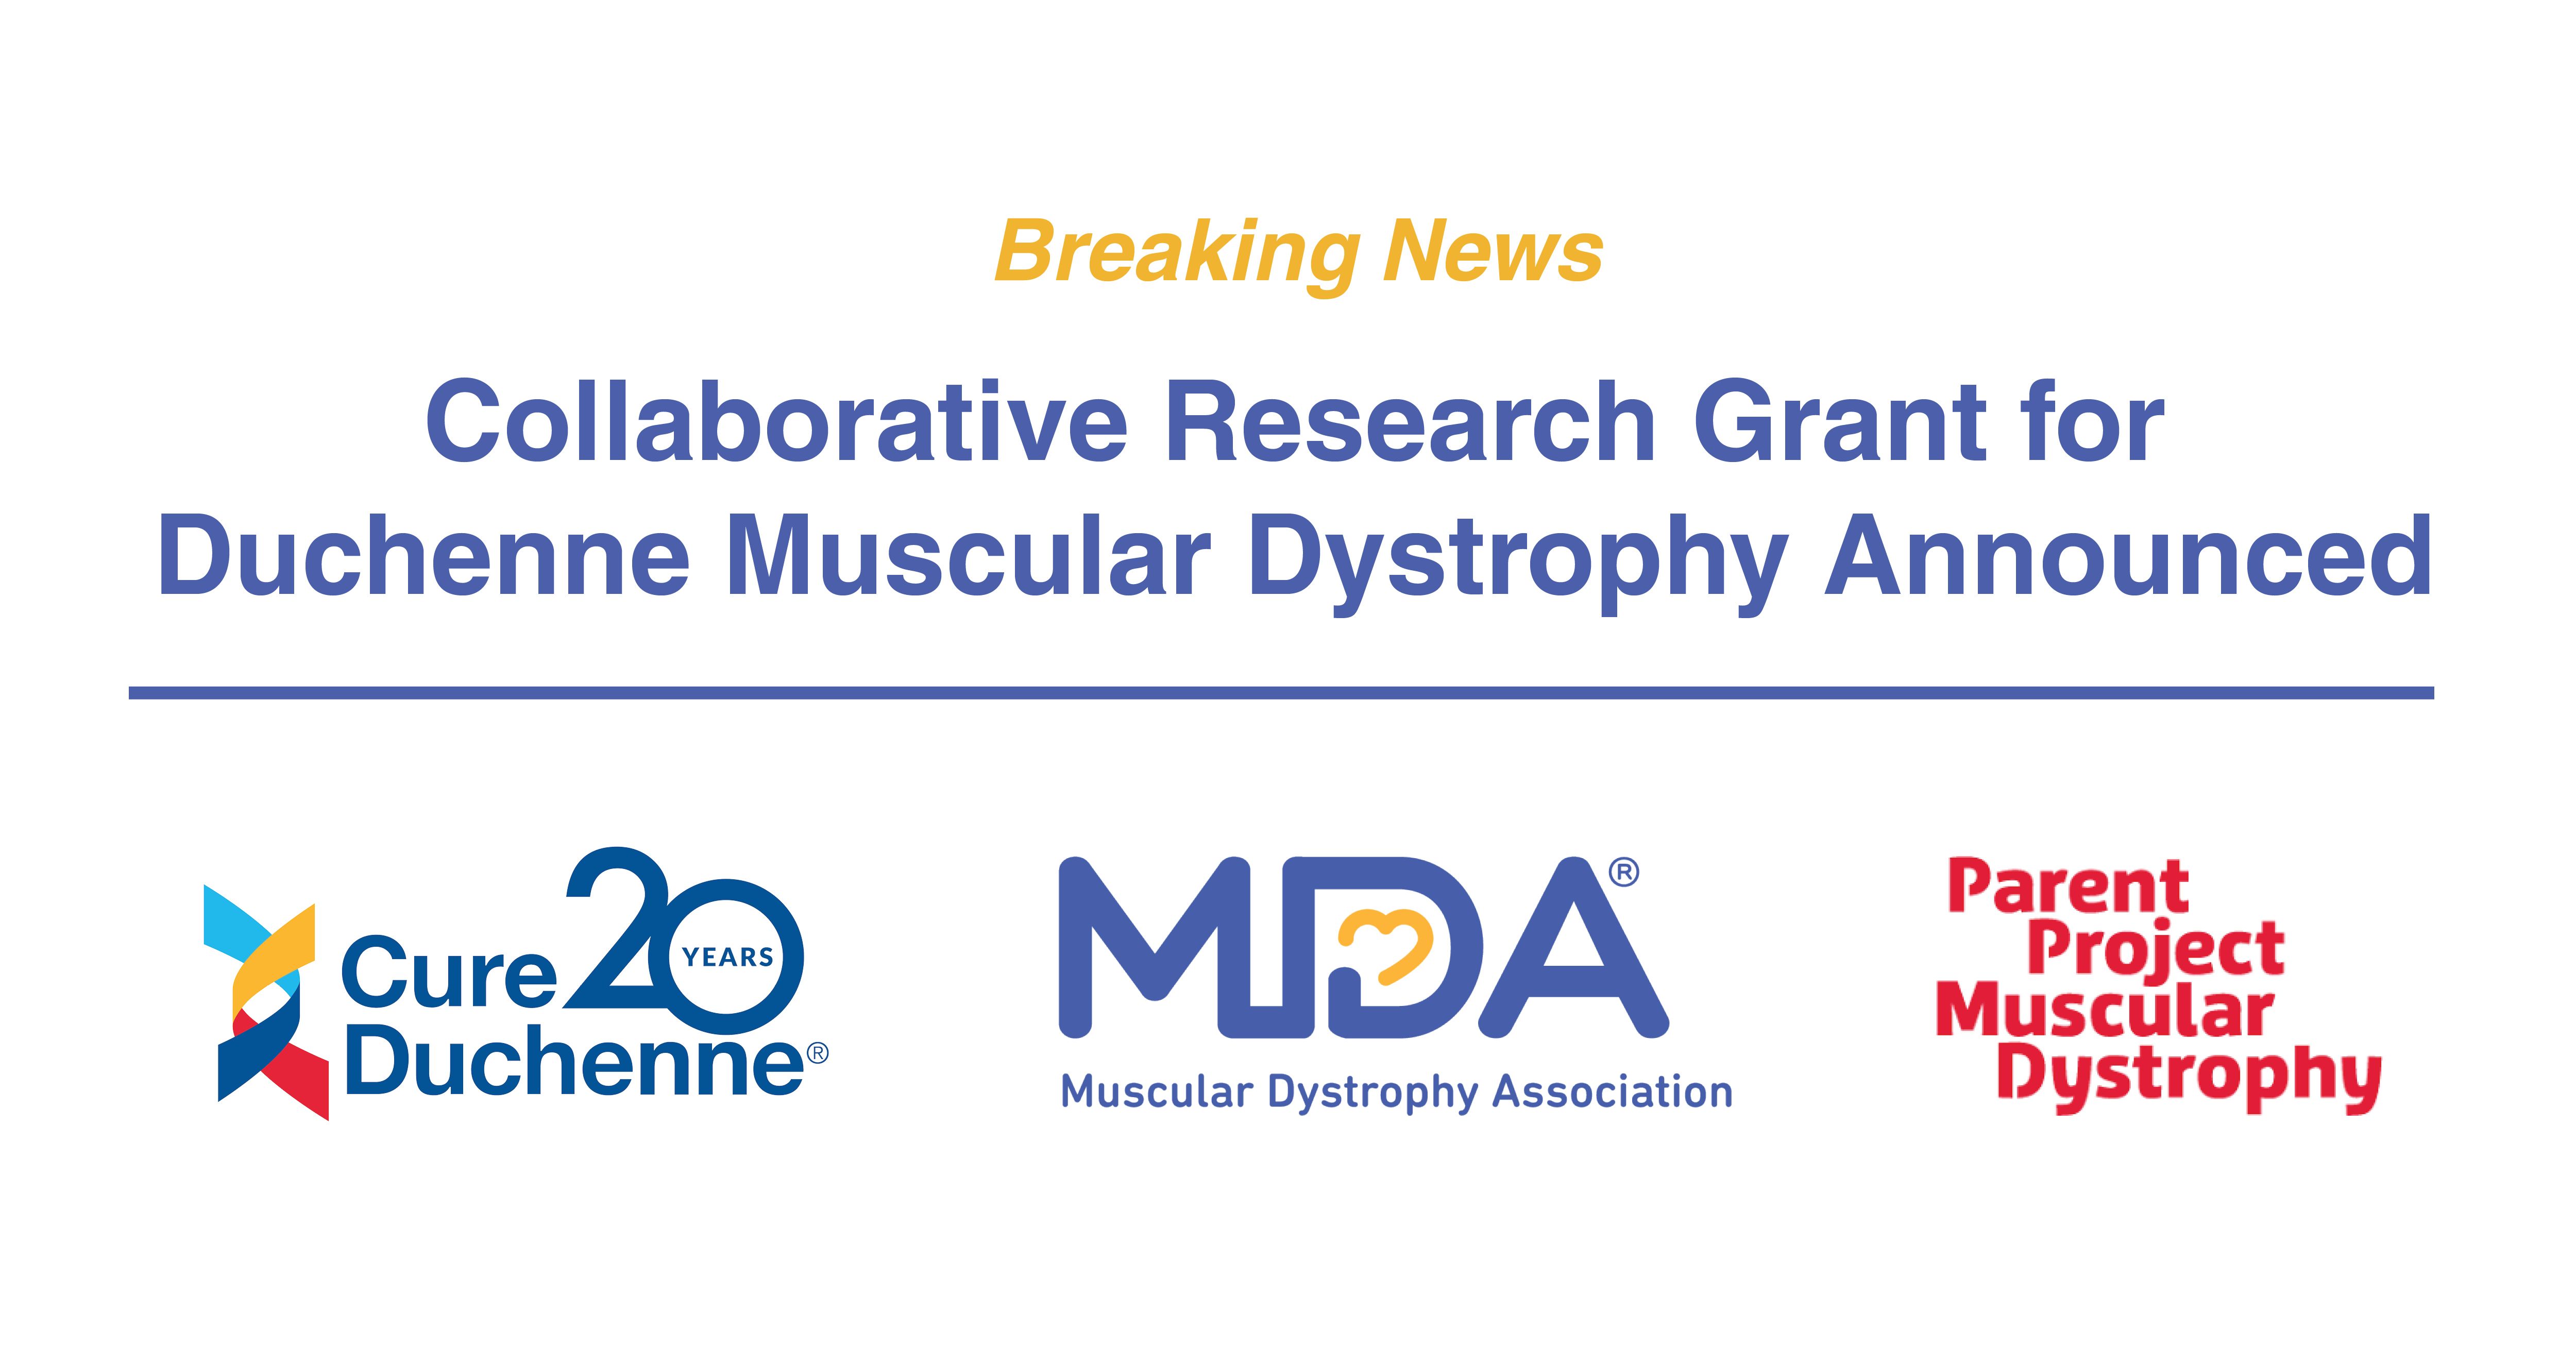 Collaborative Research Grant for Duchenne Muscular Dystrophy Announced